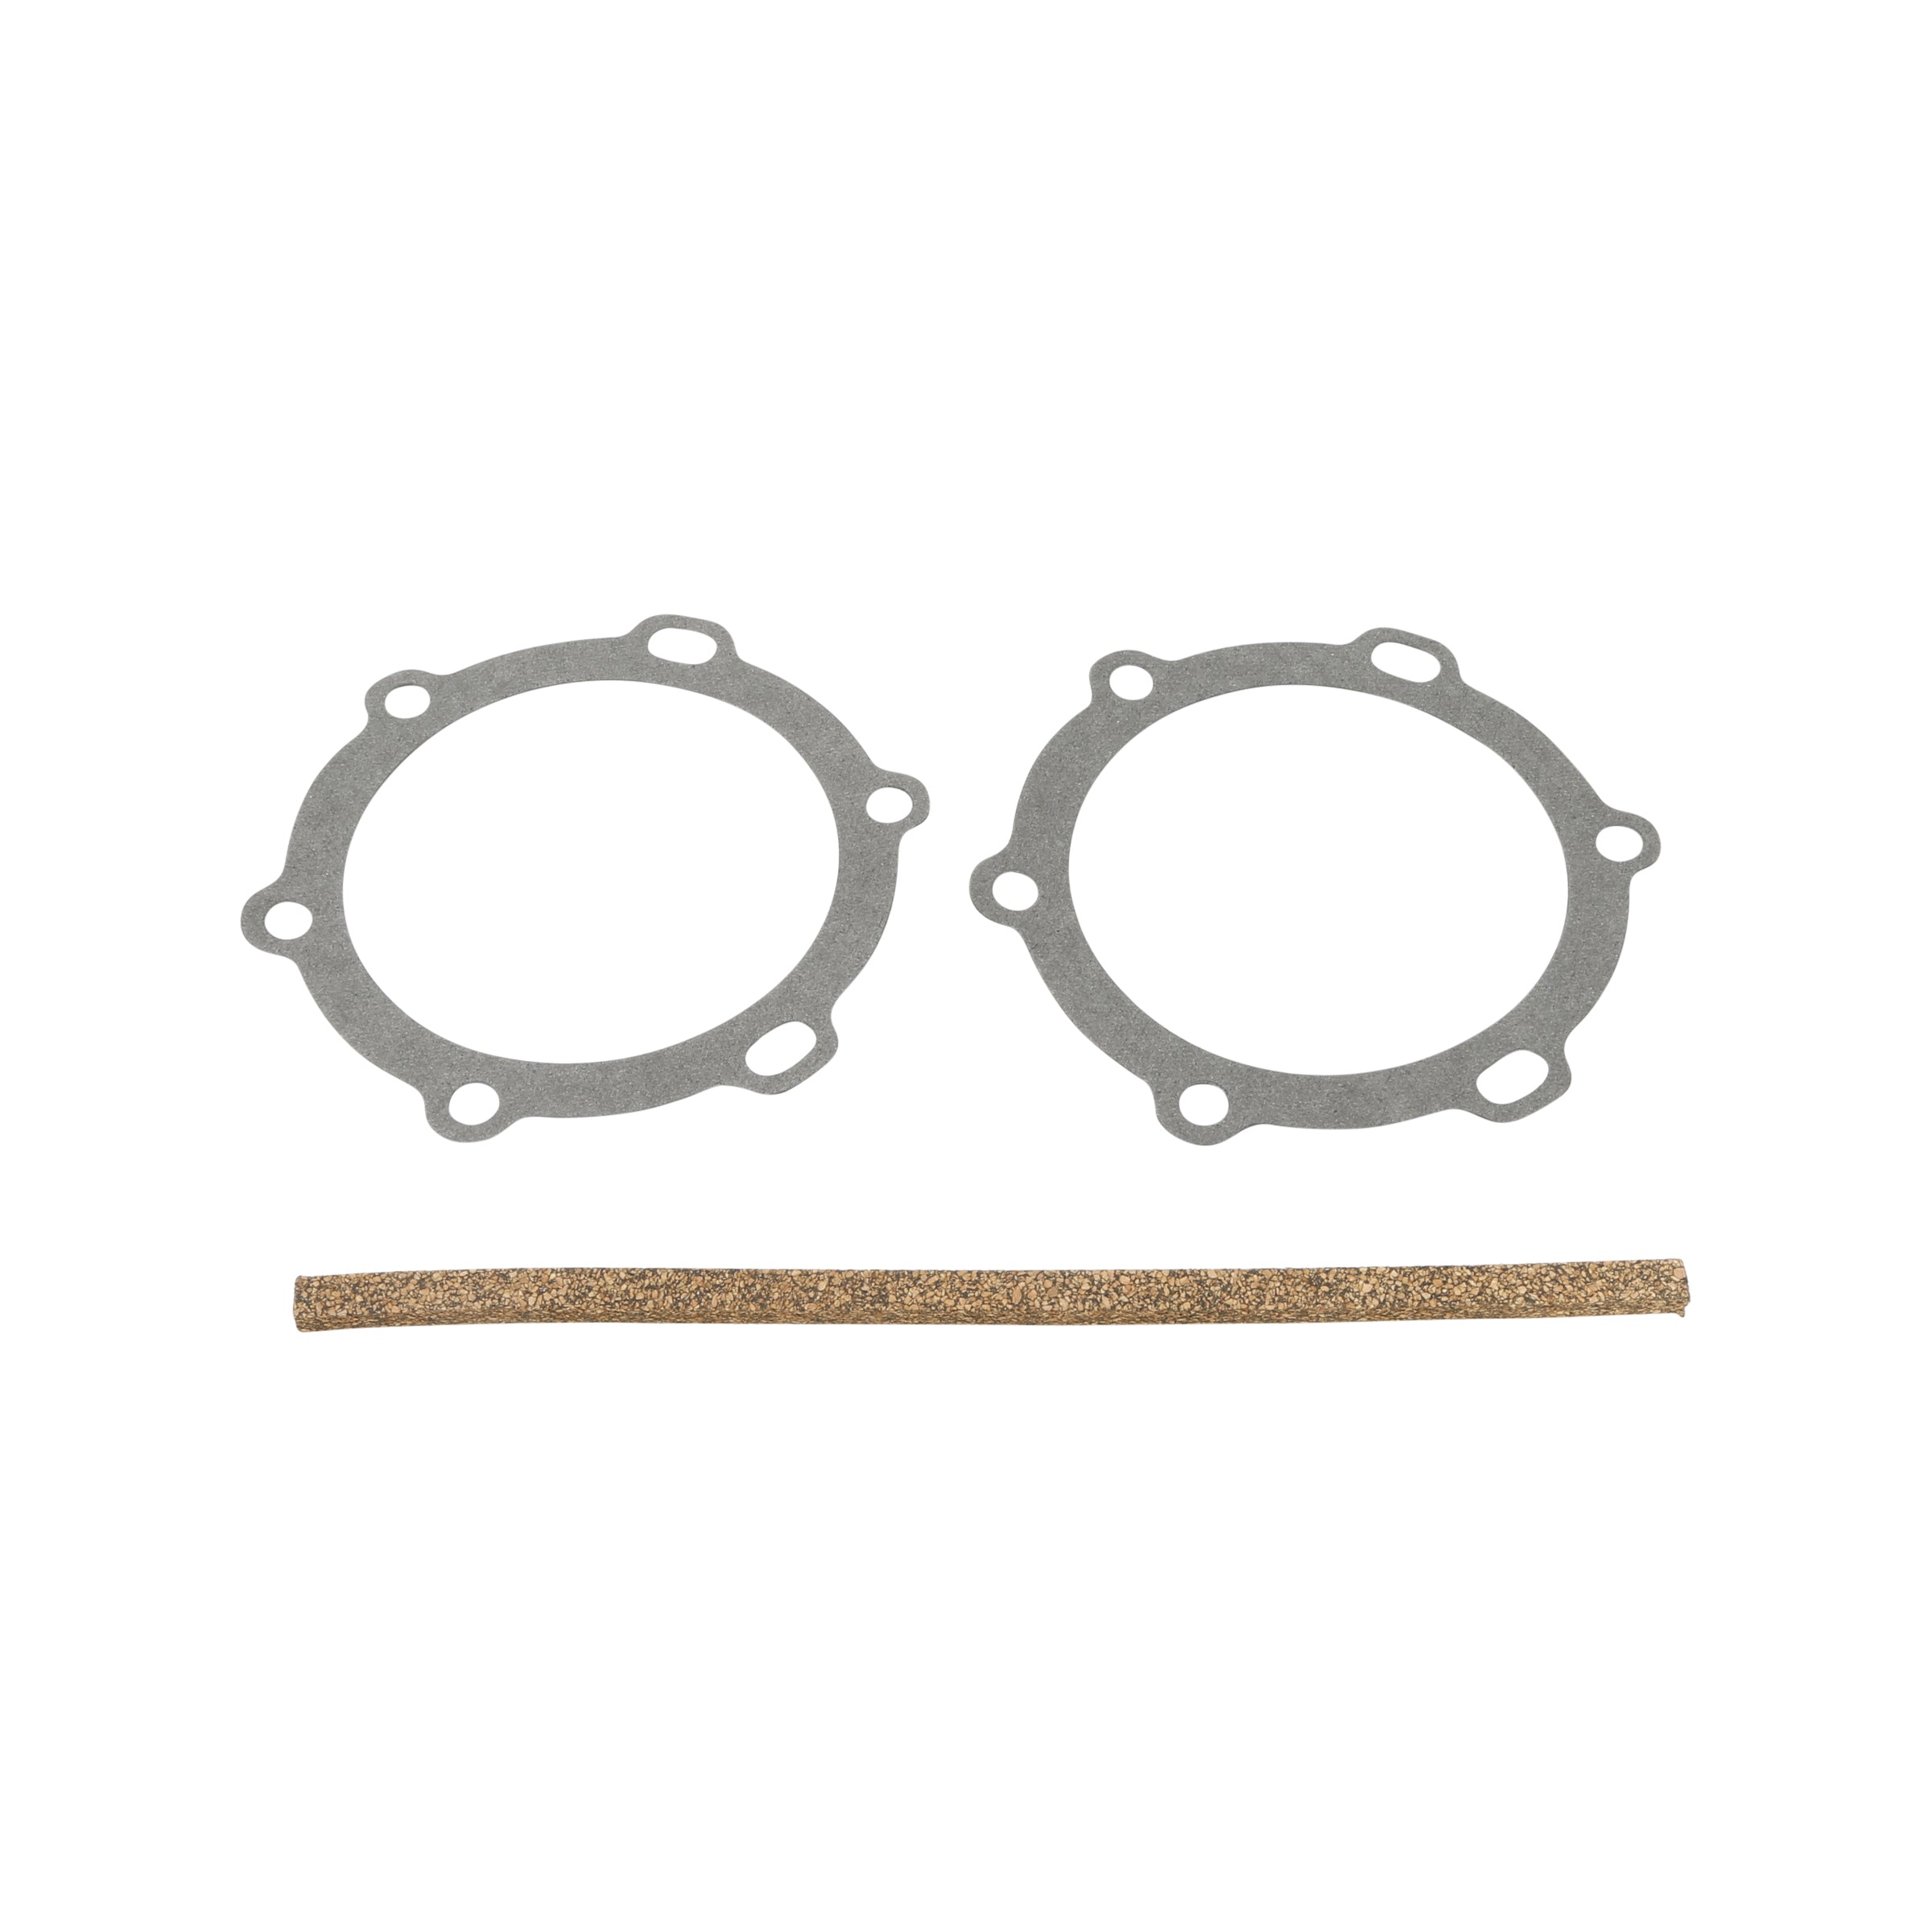 Universal Joint Gasket Set • 1928-31 Model A Ford